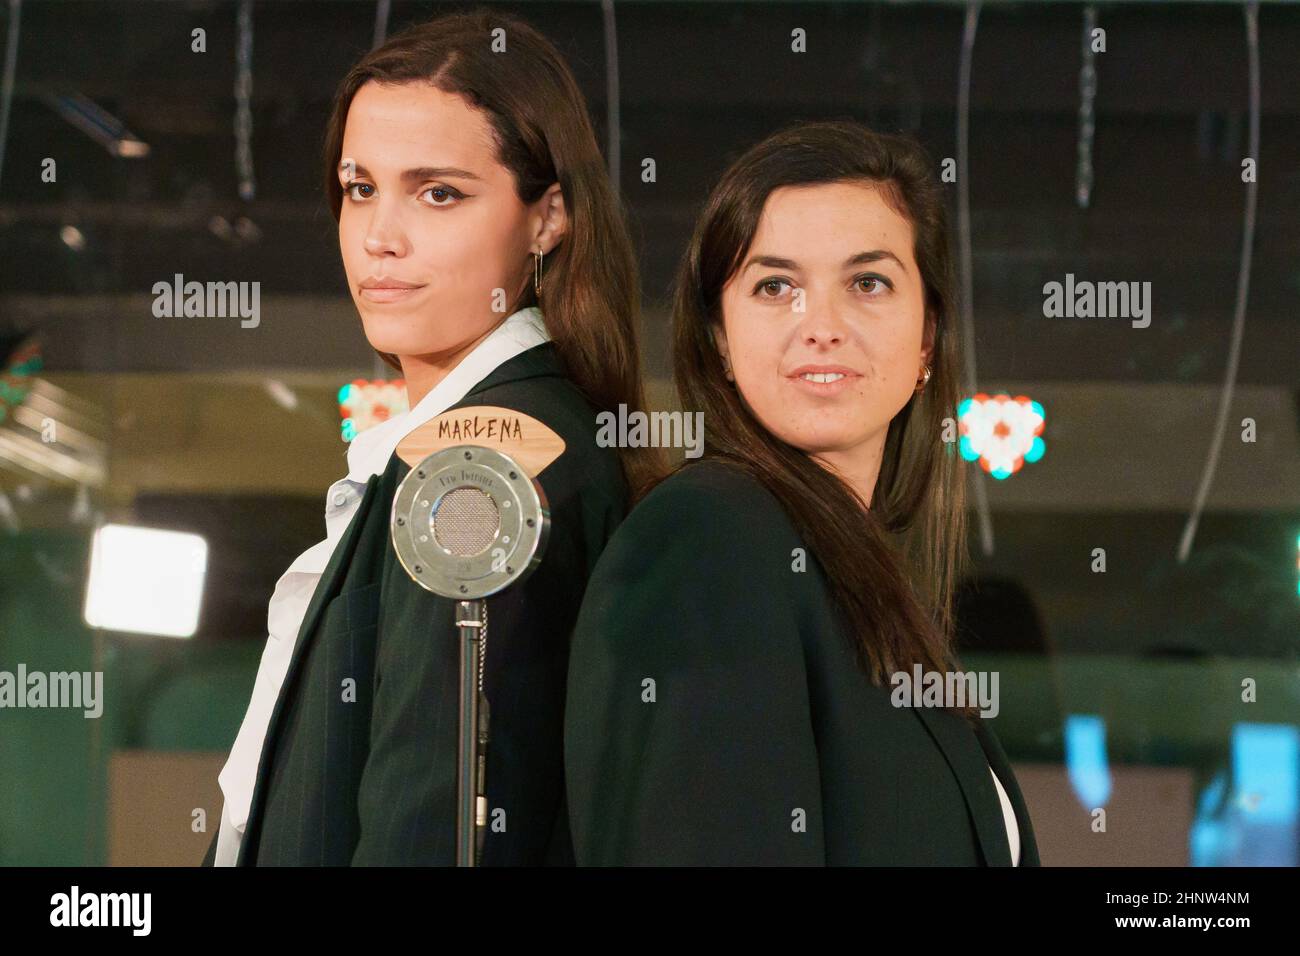 Madrid, Spain. 17th Feb, 2022. Ana Legazpi (L) and Carolina Moyano (R) from Marlena group pose during the portrait session in Madrid. Credit: SOPA Images Limited/Alamy Live News Stock Photo